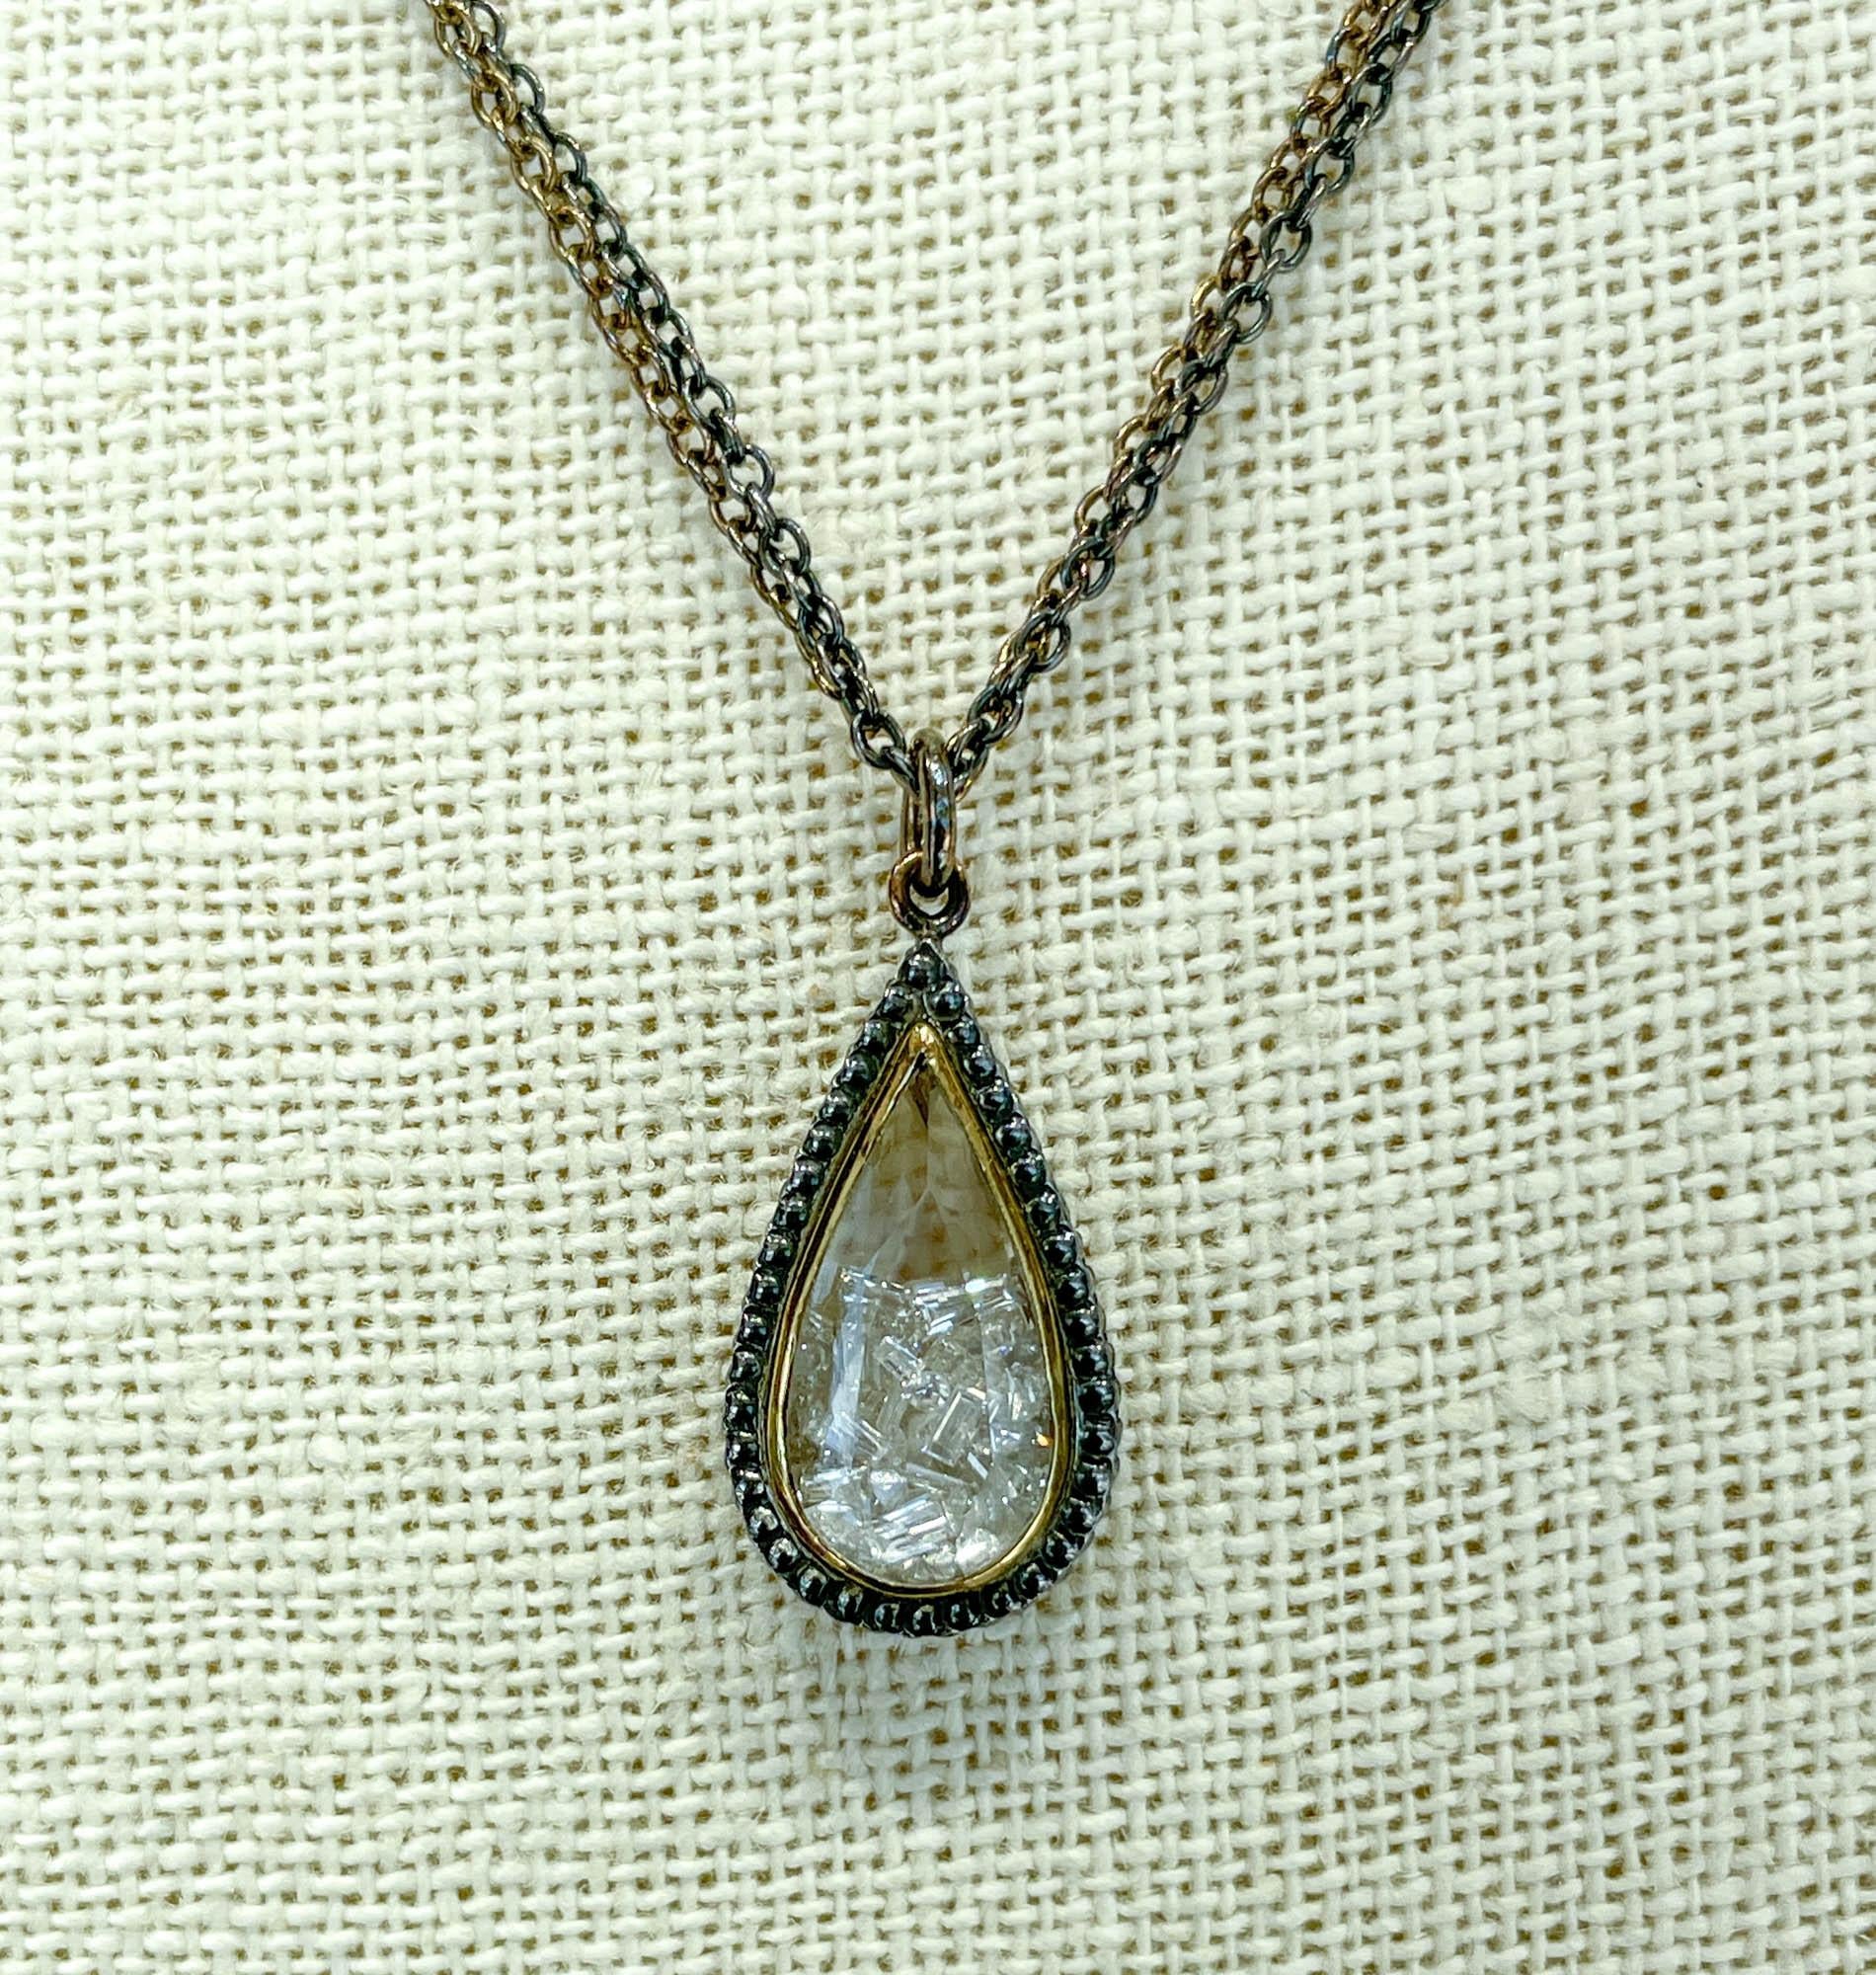 Moritz Glik 18k Yellow Gold Blackened Silver Diamond Teardrop Shaker Pendant Double Chain Necklace 
Set with Mixed cut diamonds set in sapphire case; estimated total weight is 0.80ctw.
The necklace is 17 inches long. 
The teardrop’s measurements are